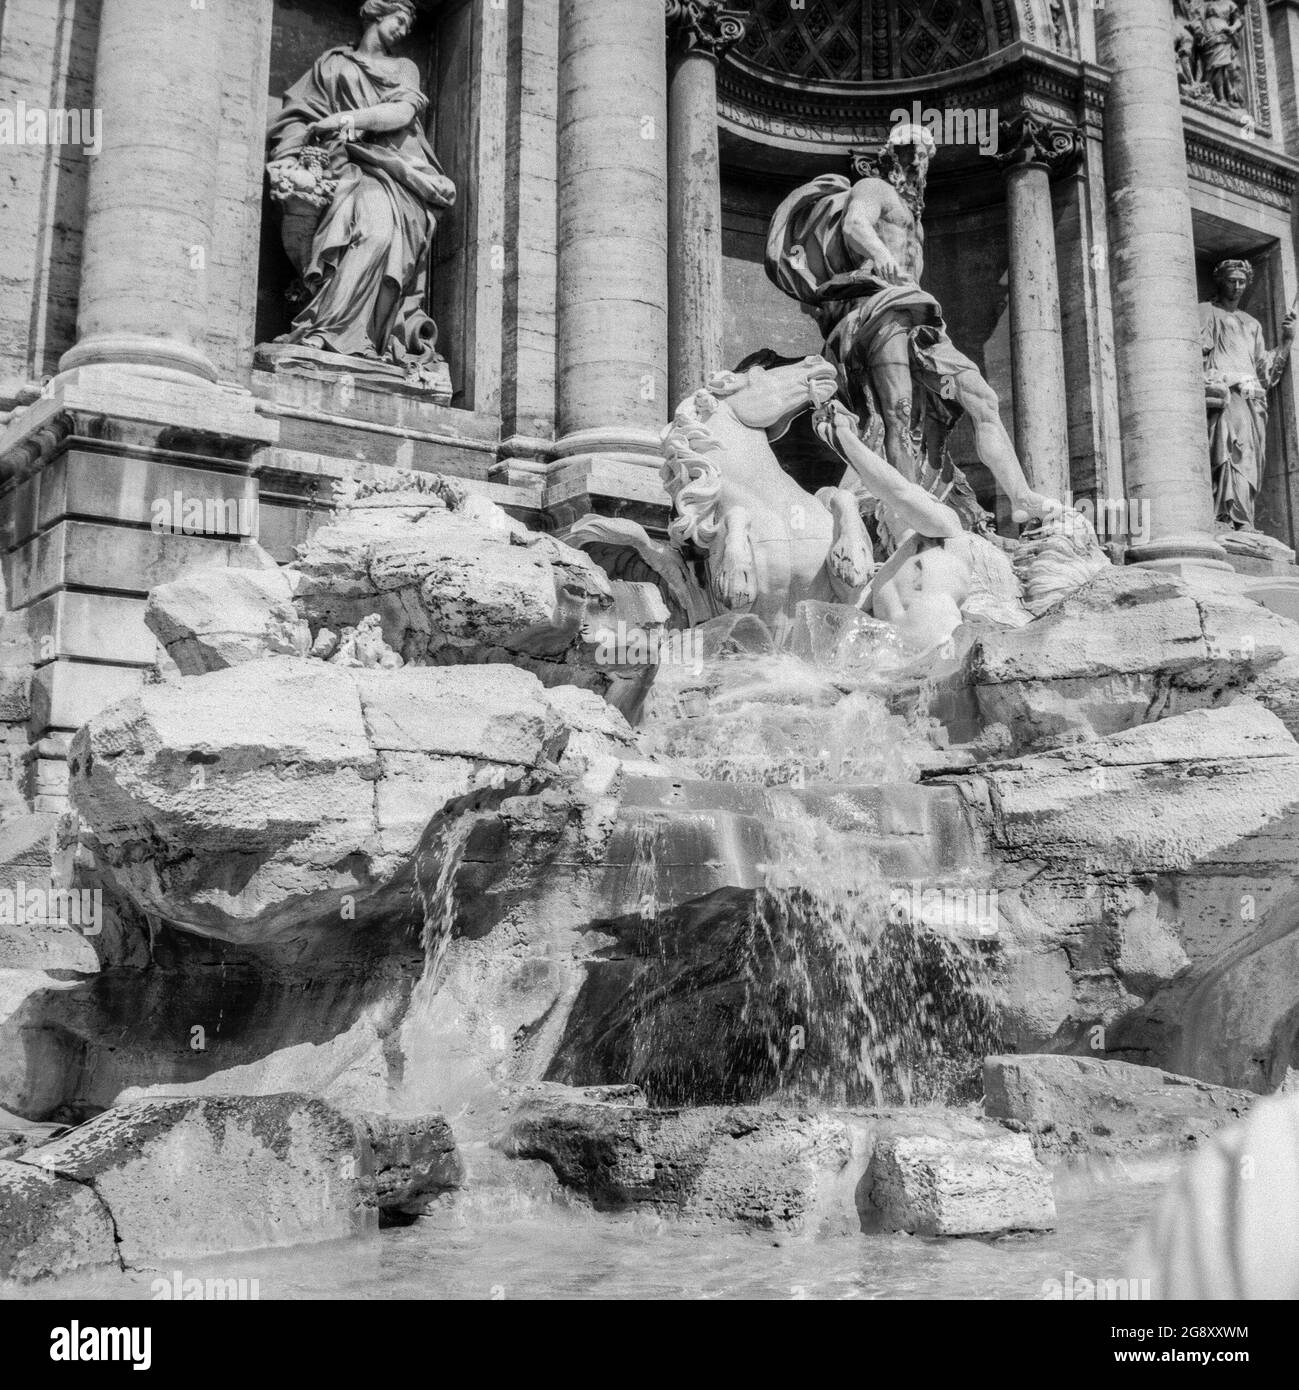 Rome, 1972: detail of the left side of famous Trevi Fountain, made famous in Fellini's film 'La dolce vita', with the bathroom scene of the actress Anita Ekberg Stock Photo